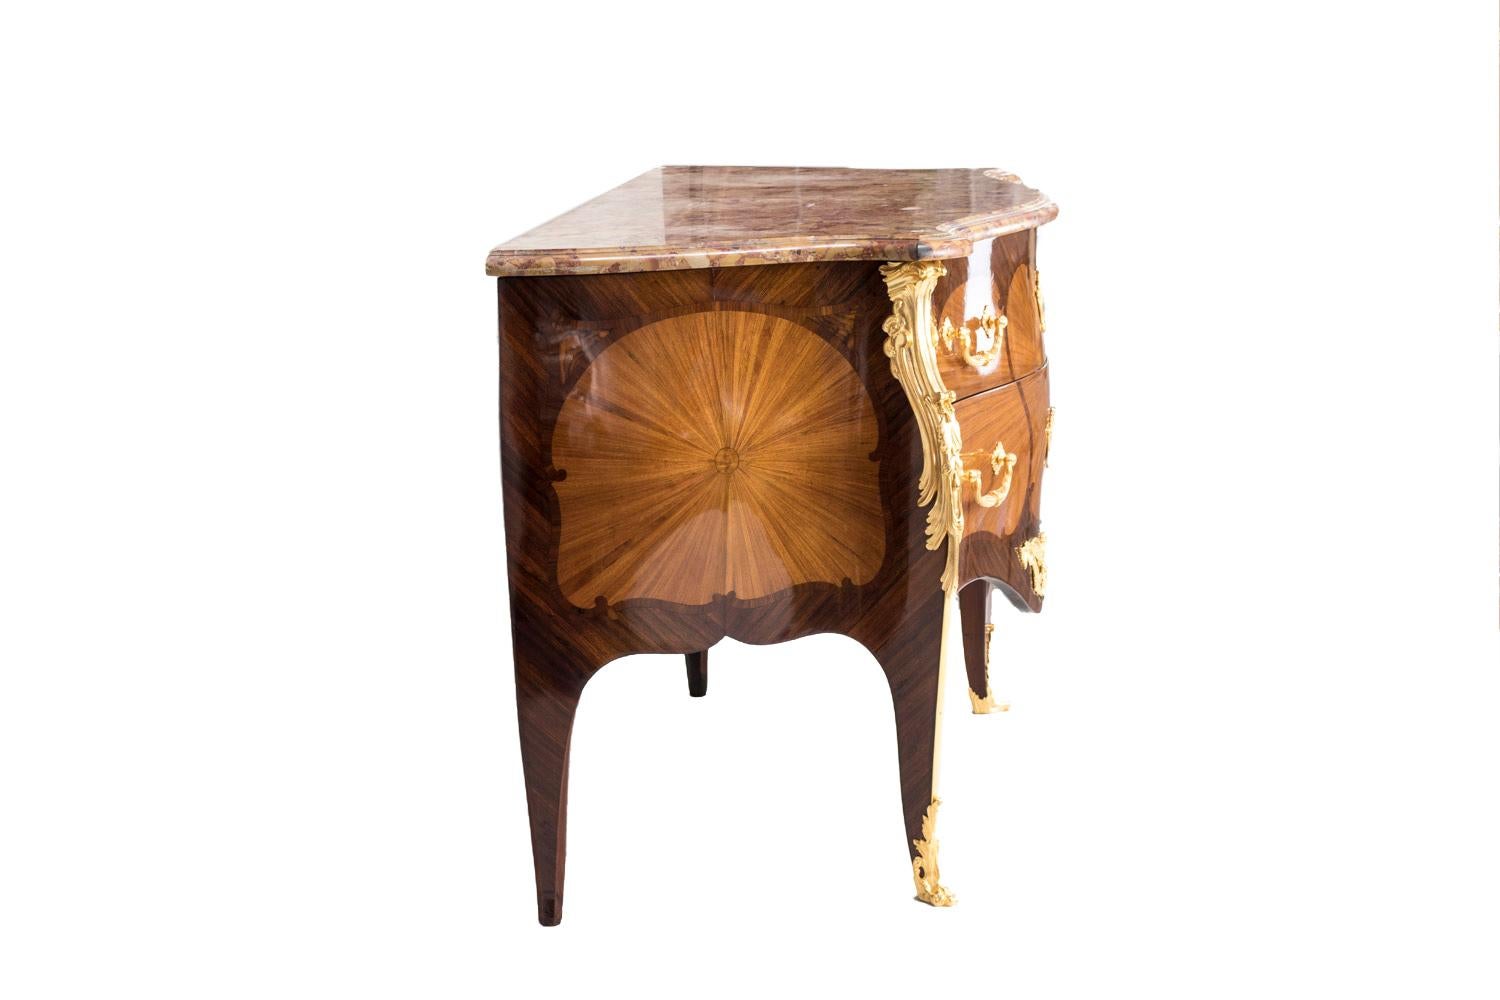 Louis XV style commode, bulged and opening with two front drawers without crosspiece and standing on cabriole legs. The furniture body is inlaid in his center with rosewood marquetry arranged in fan-shaped and framed with kingwood. Two little